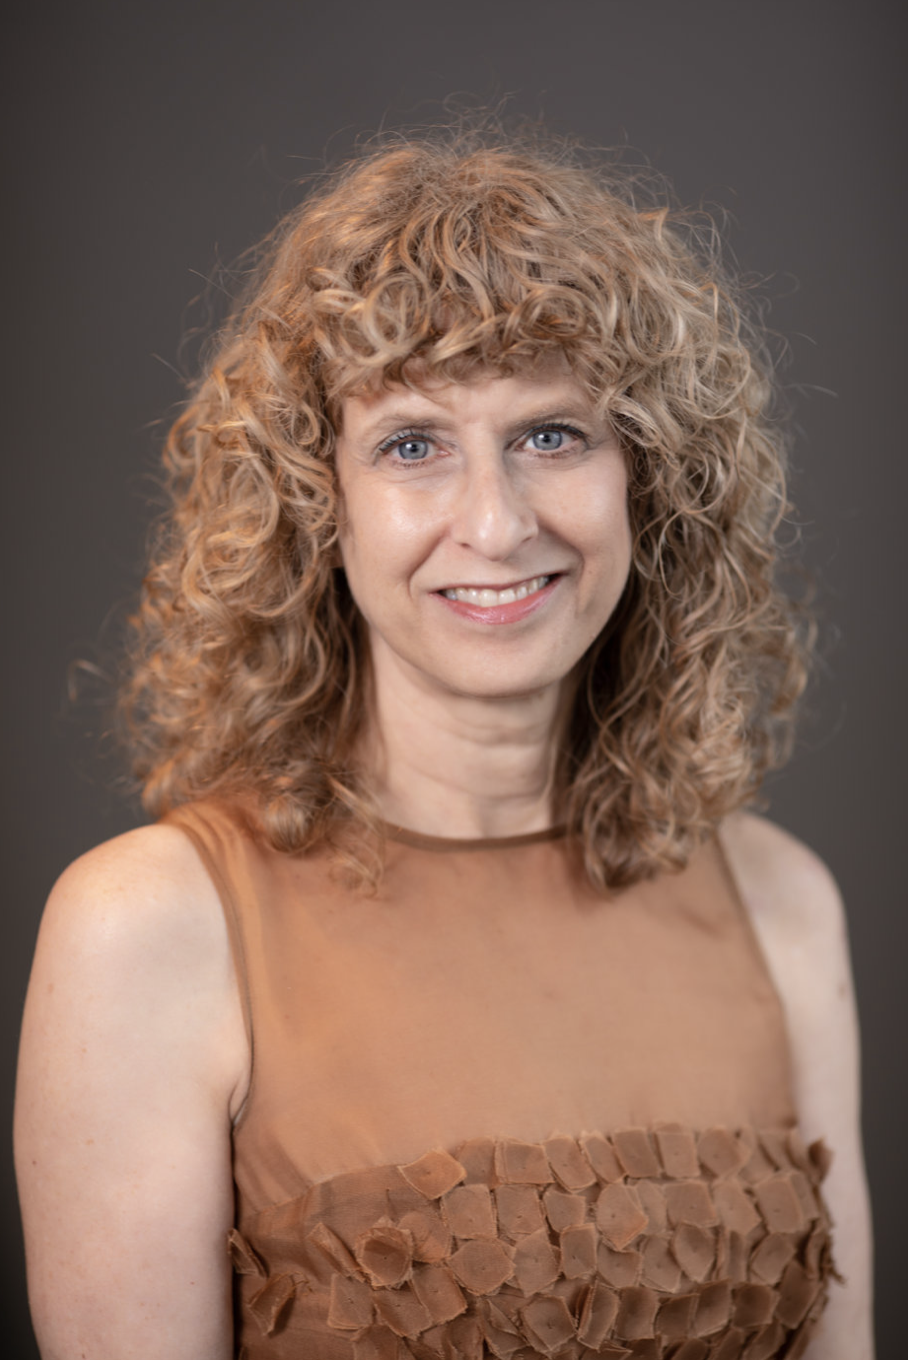 a smiling woman with curly hair looking at the camera